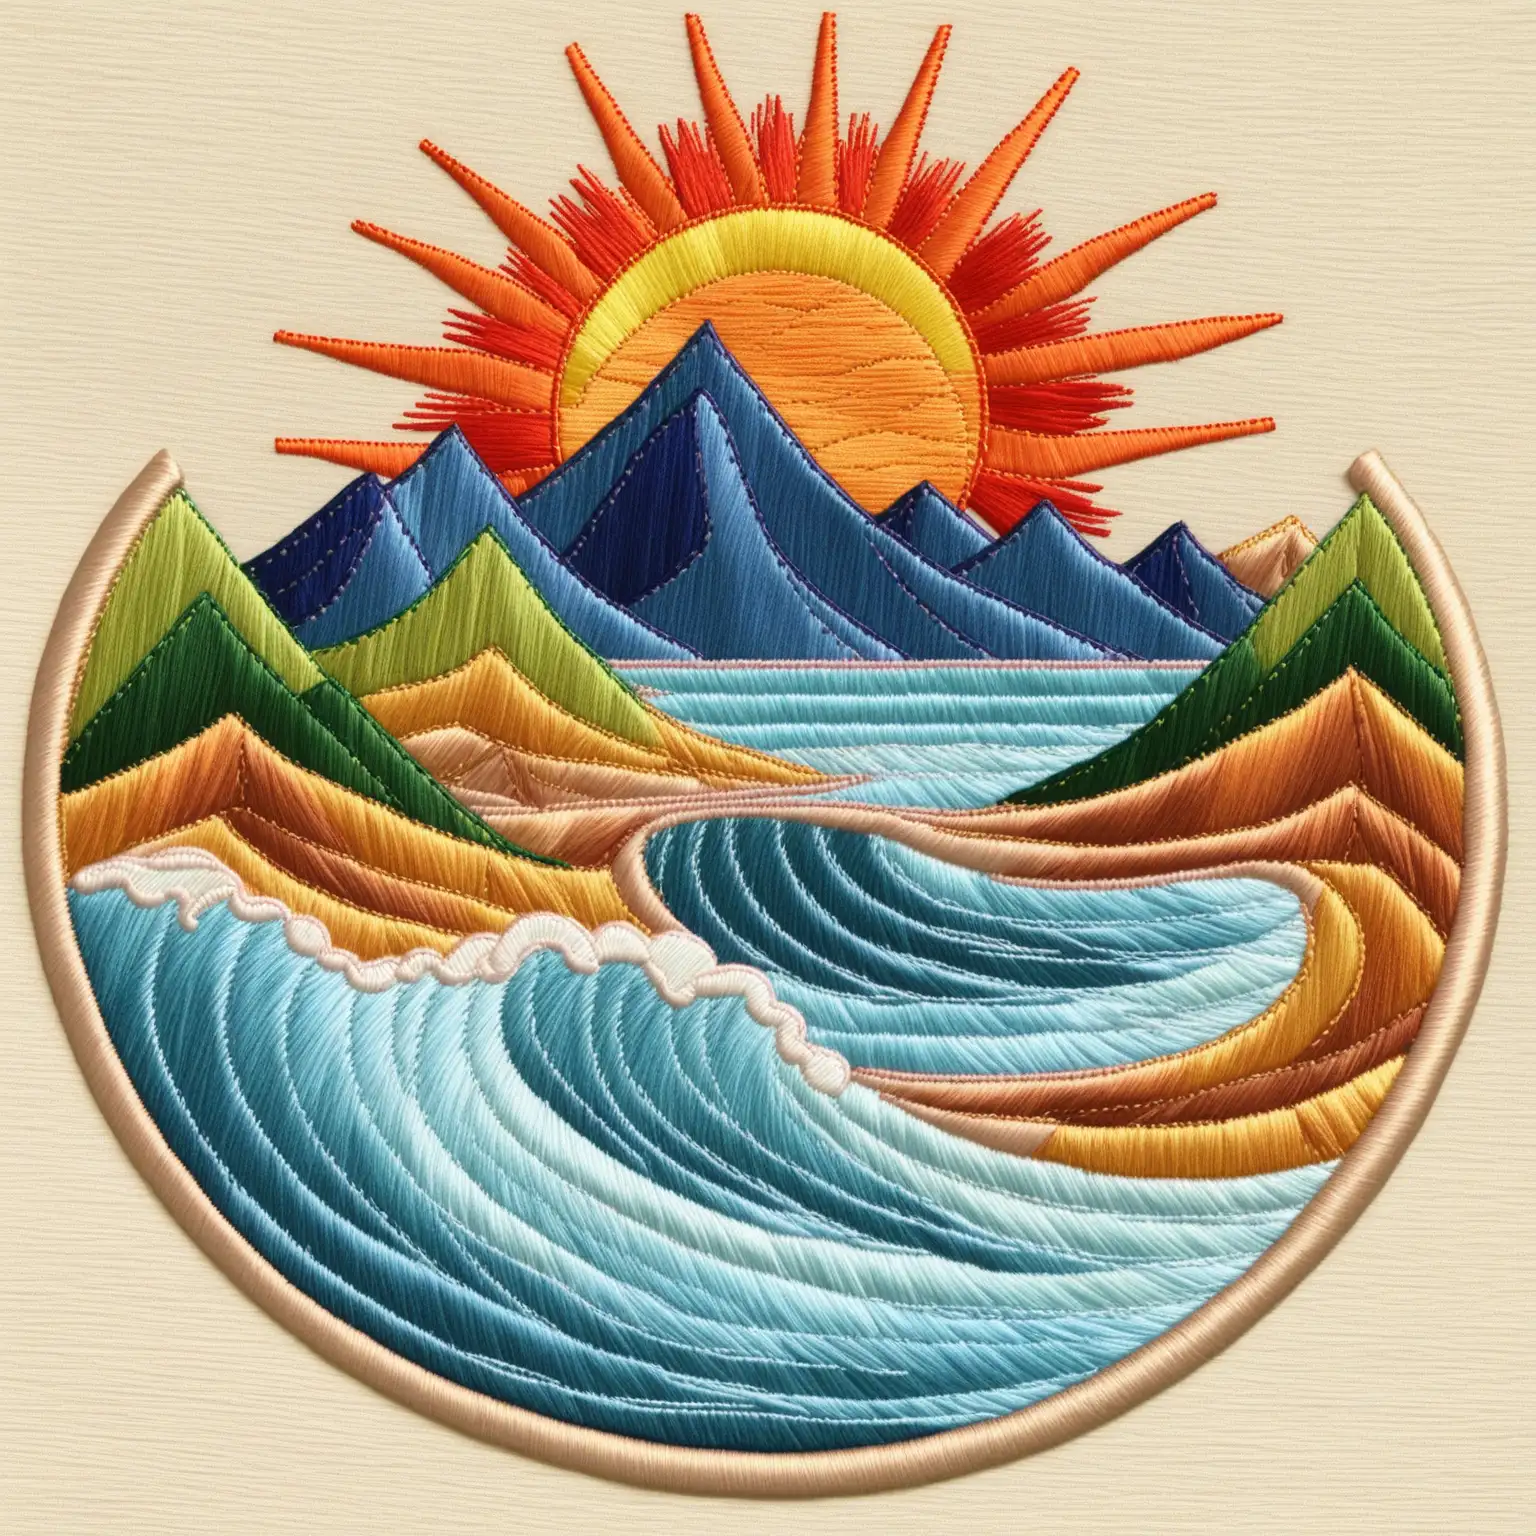 simple satin stitch embroidery design of a landscape with mountains the sun the and the surf, boyish, fun 